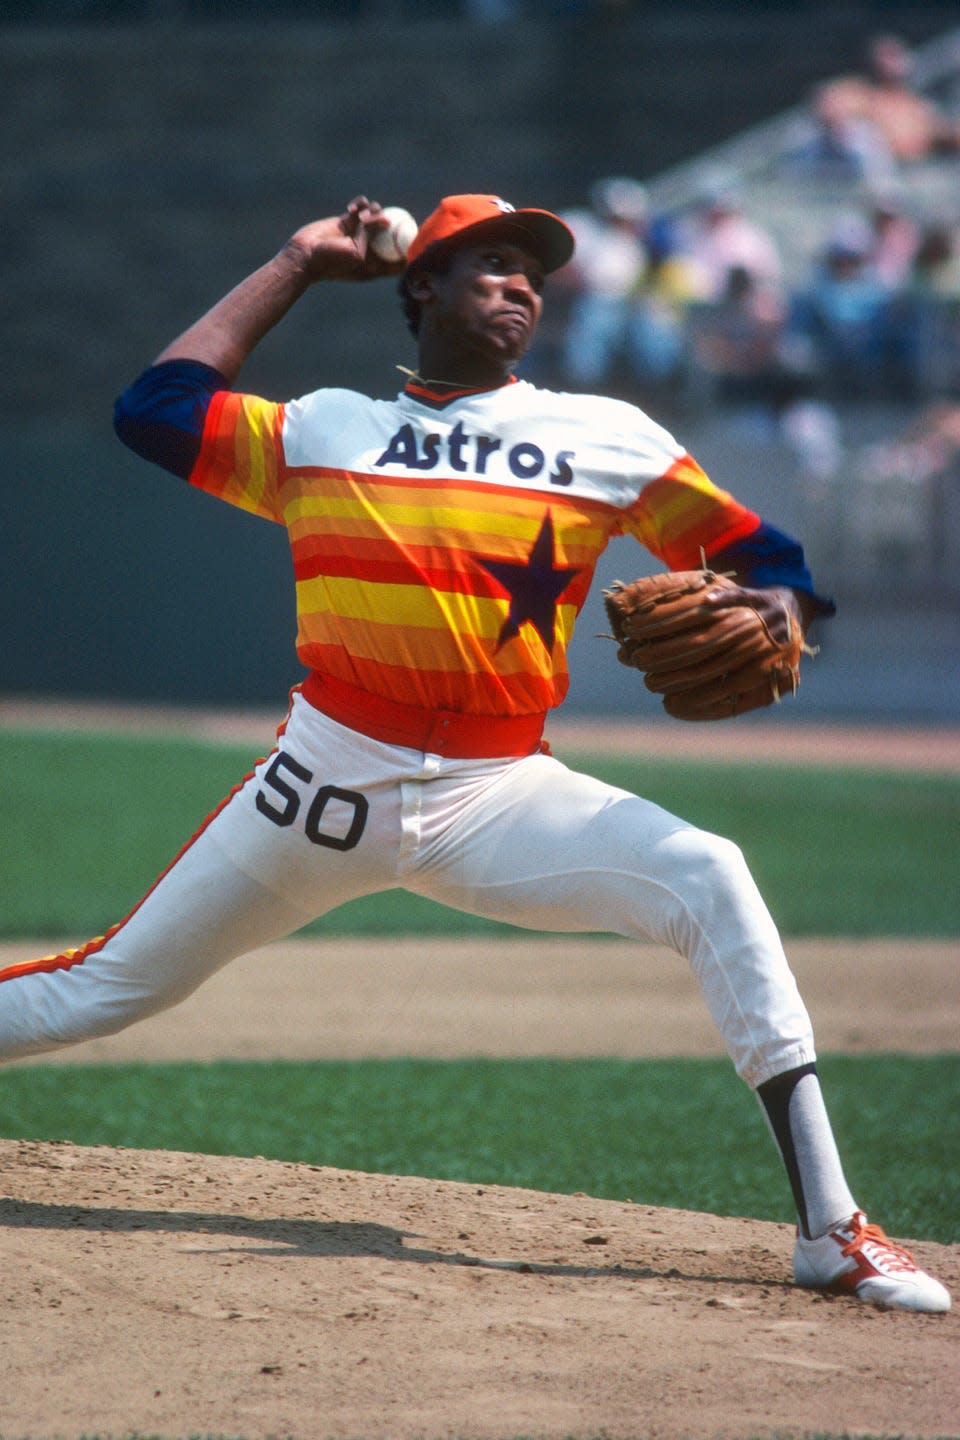 <p>This is, hands down, the best baseball uniform of all time. You killed it, Astros. You killed it. </p><p><strong>Verdict:</strong> Best<br></p>